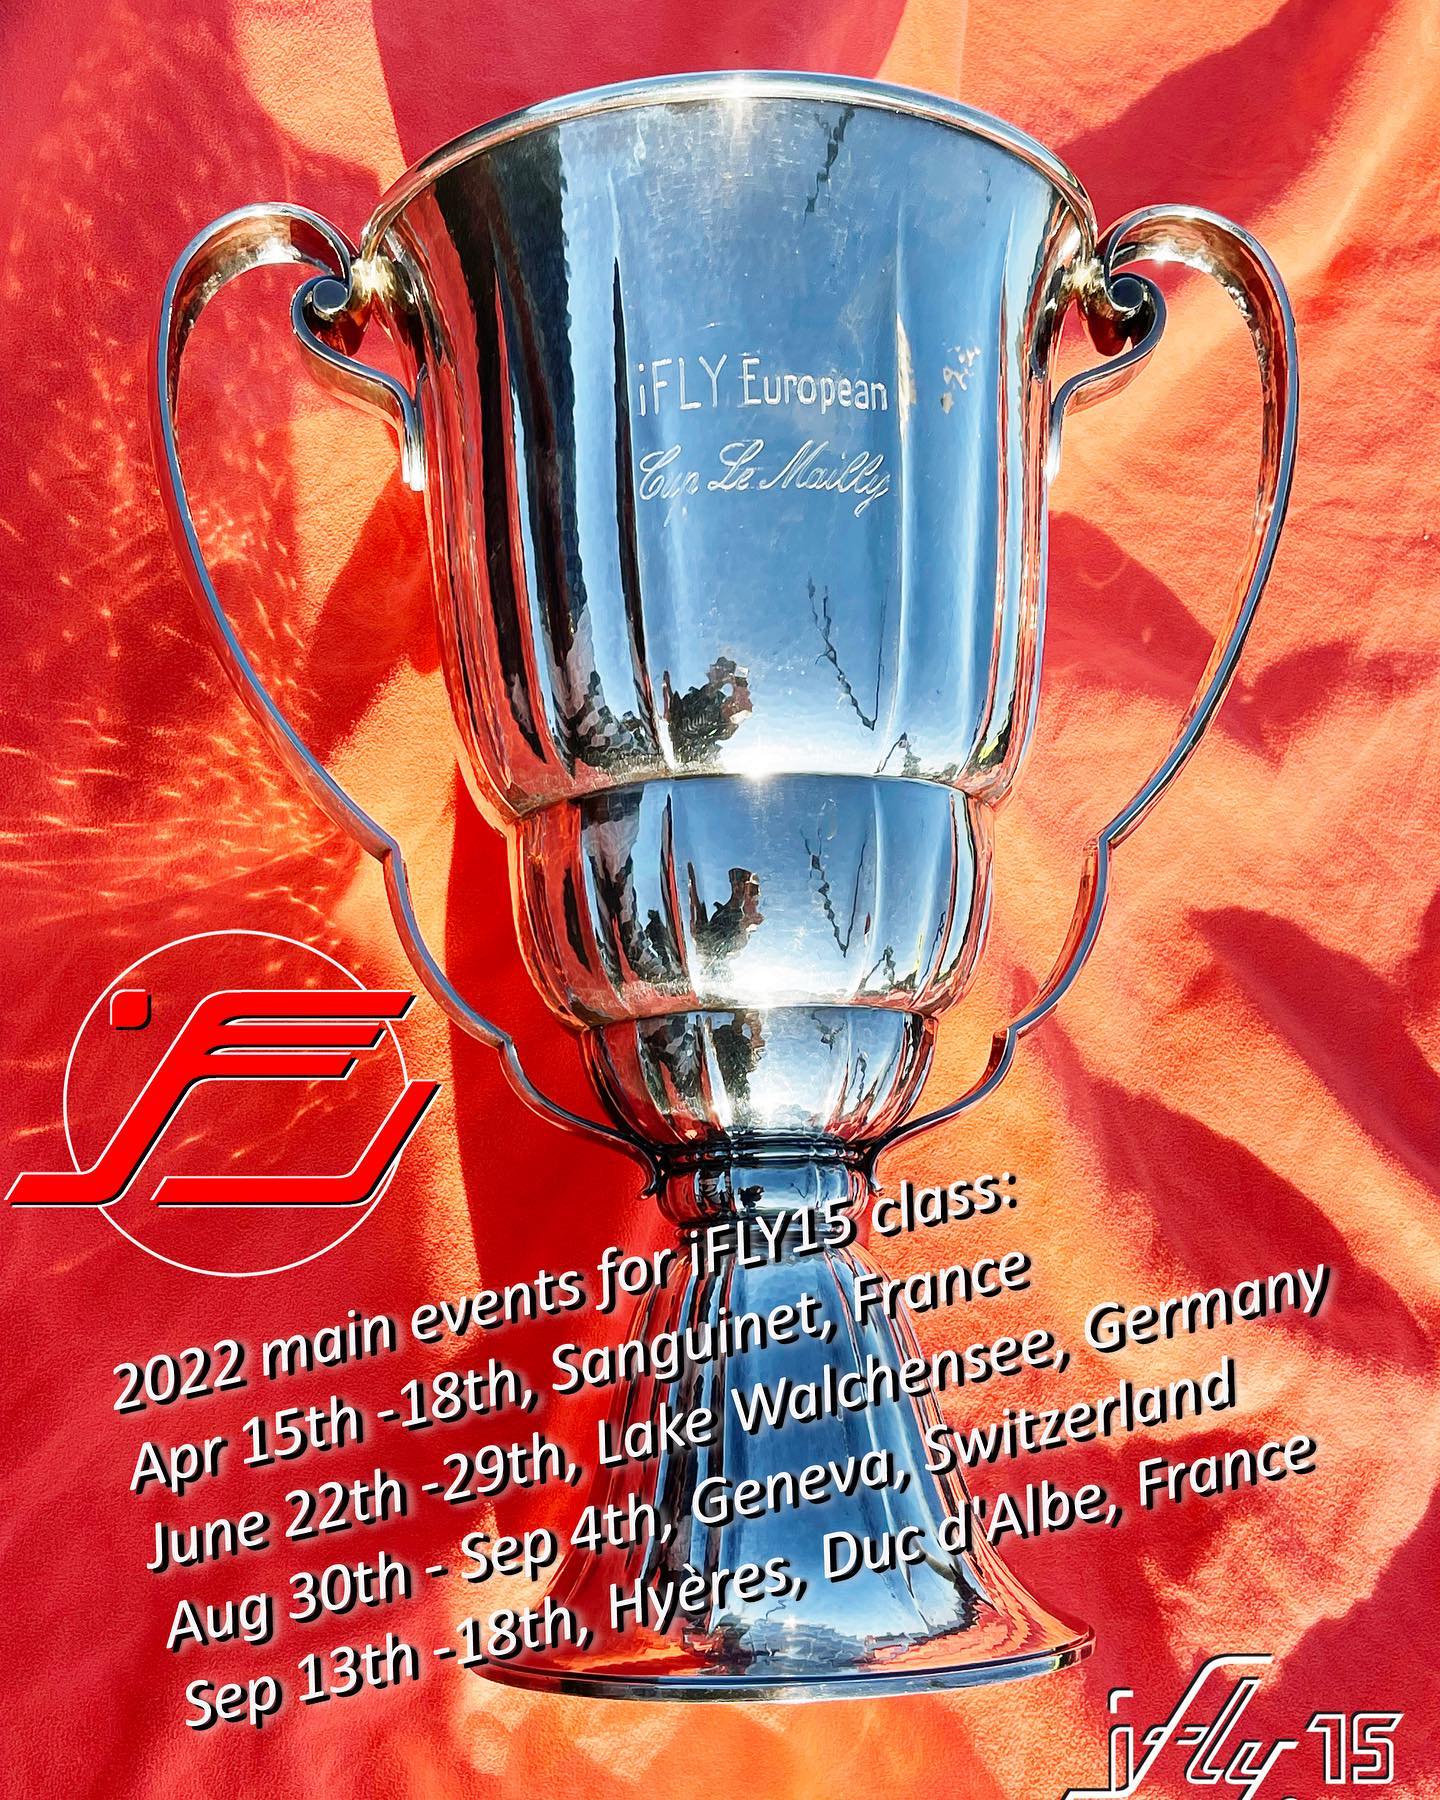 iFLY European Cup le Mailly, the historic silver Cup. Racing in Geneva, AUG 30th- SEP 04th. Including training with the designer.
Further 3 main events for the iFLY15 OneDesign class and the Formula Foil:
>>> JUNE 22nd-29th : iFLY Summer games, Lake Walchensee, Germany.
>>> 16th-18th APR : Sanguinet, France.
>>> SEP (tbd) : Duc d’Albe, Hyères, France.
Further regattas to race with iFLY15:
>>> APR 29th - MAY 1st : Eurocat Carnac.
>>> MAY 14th -15th: Open des Multicoques, Geneva, SNG.
>>> JUNE 4th-6th : Ostseepokal Scharbeutz, Germany. 
>>> JUNE 11th-12th : Internationalen Katpokal Bodensee, Lindau, Germany.
>>> JUNE 11th-12th : Raid Émeraude, Saint Lunaire, France.
>>> JUNE (tbd, second half) : TEXEL, Netherlands
>>> JULY (tbd, second half) : Foiling Week Garda
>>> AUG (tbd, mid month): Bol d'Or du lac de Joux, Switzerland.
>>> AUG 21st : Grand Prix de Maubuisson, Carcans Maubuisson, France.
 
#iFLYRacing #SoundOfSpeed #iFLY15 #TheNewFoilingGeneration #loyaltothefoil #foiling #sail #sailboats #sailingboat #sailingphotography #sailingworld #iFLY #FormulaFoil #FoilingCatamaran #Catamaran #foiler #Katamaran #FlySafe #ActiveFoilControl #Foil #Hydrofoil #foilinggeneration #lifestyle #sailing #flying #sailFriends #loyaltothefoil #codeF #sailboats #sailingboat